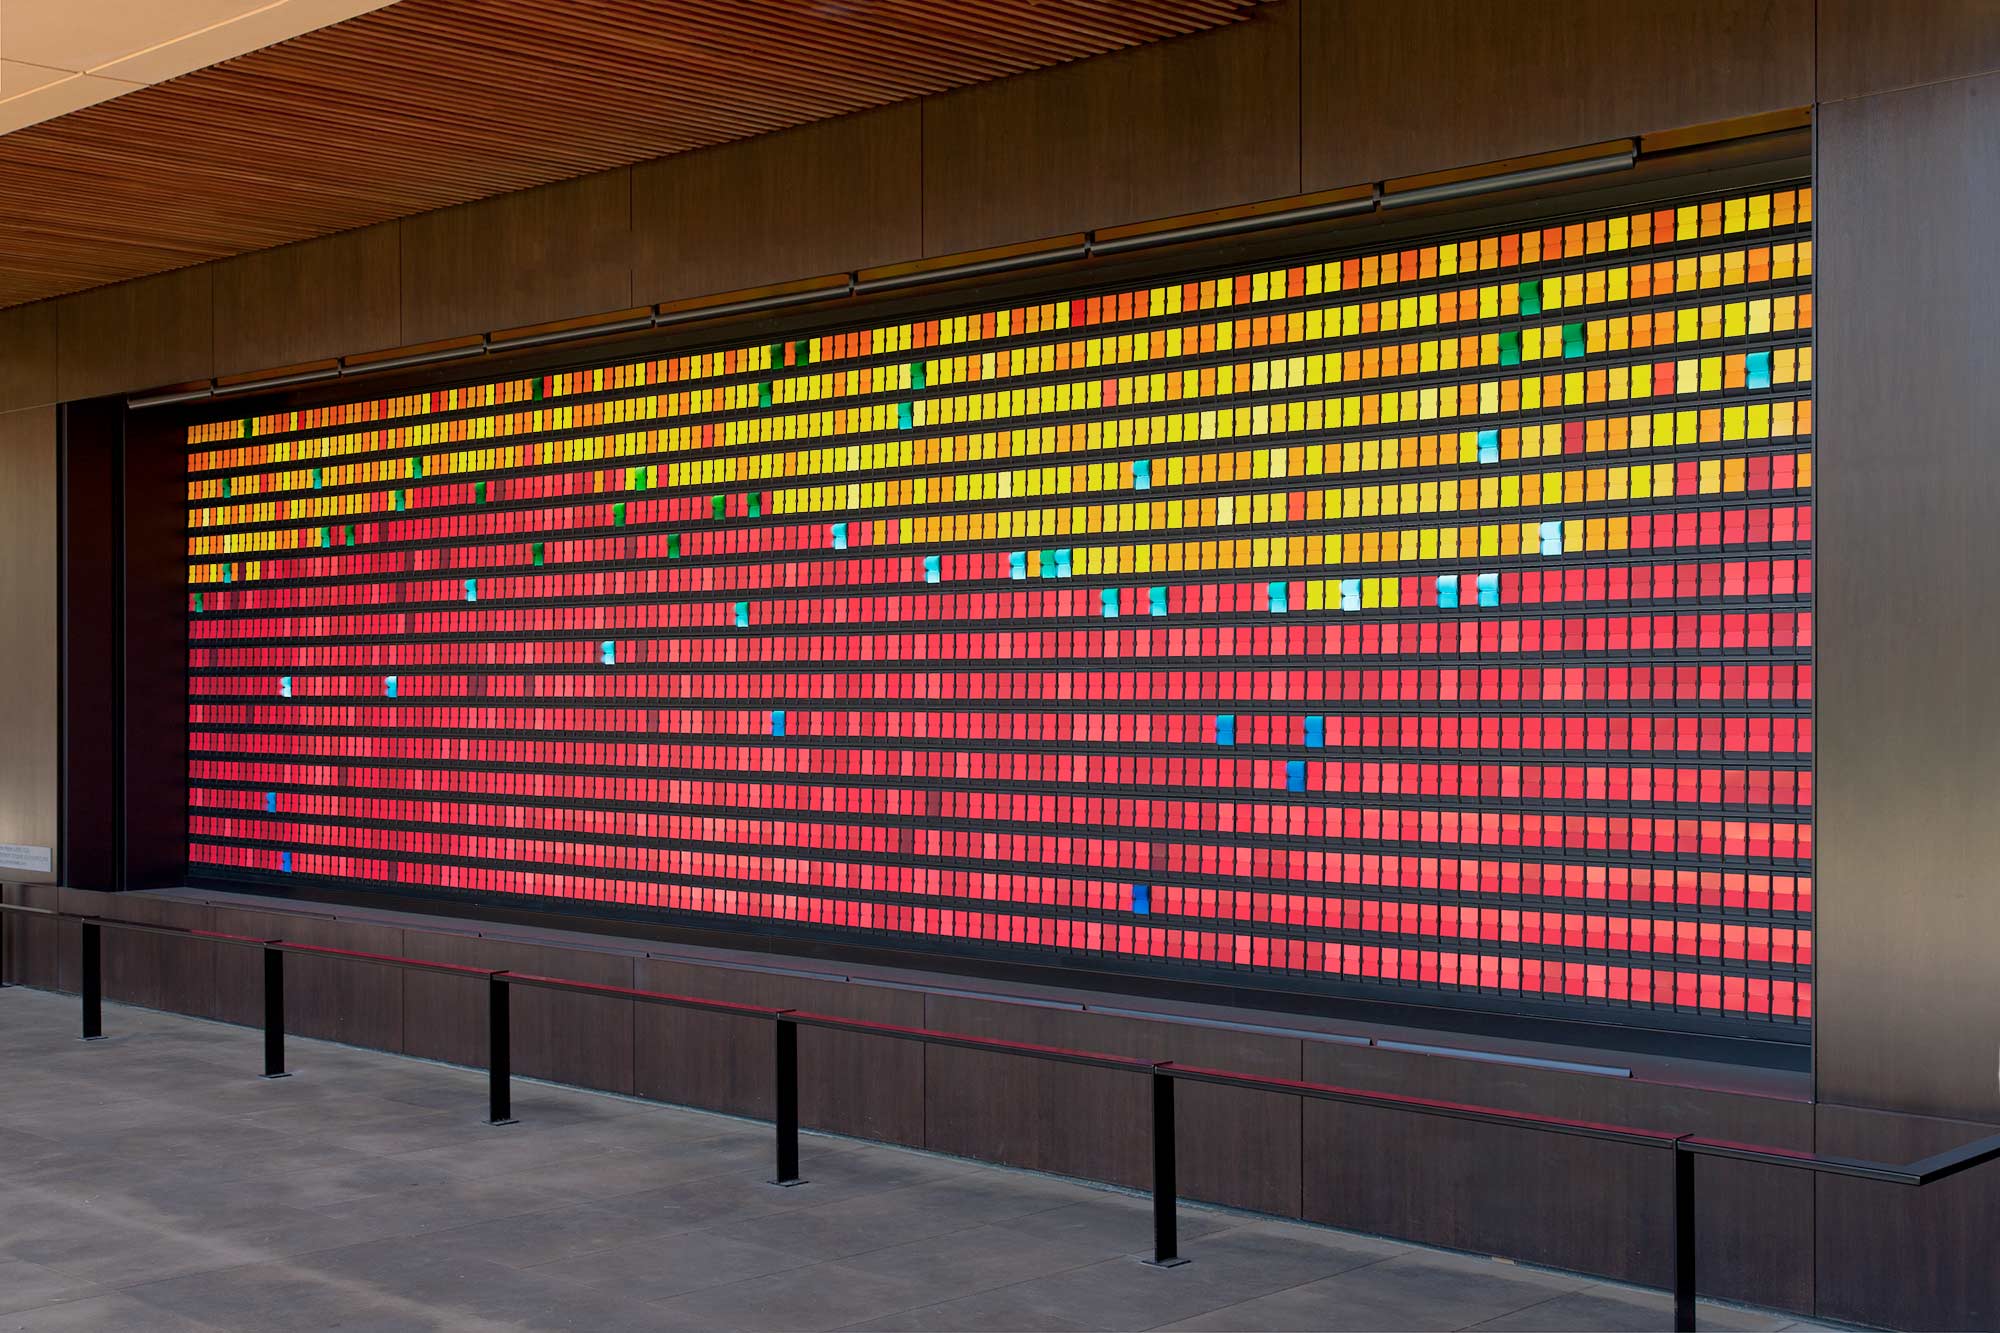 INSTALLATION (MOMENTS TO THE FUTURE AT STANFORD UNIVERSITY)